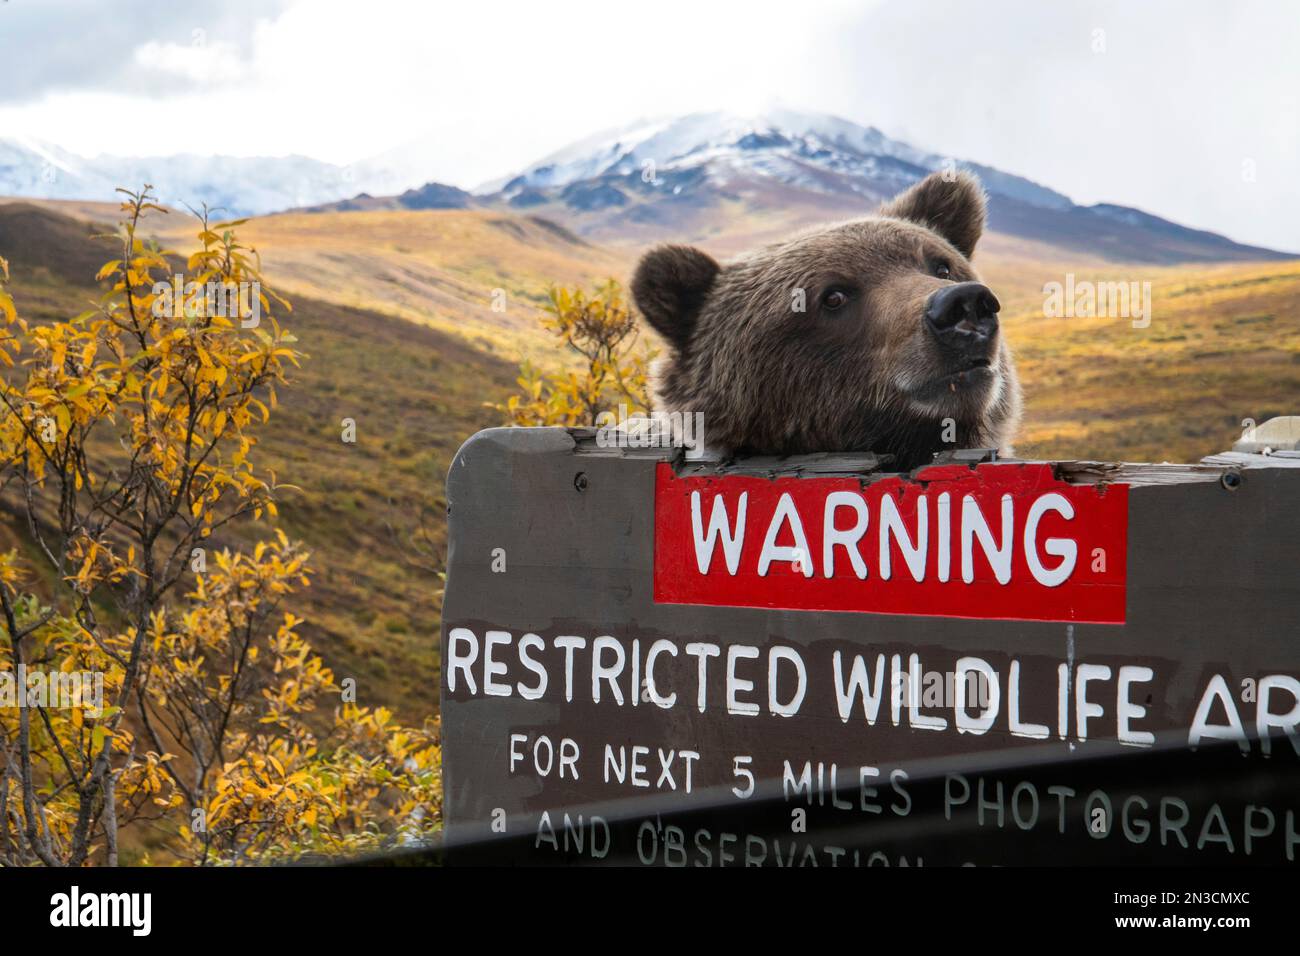 Grizzly bear (Ursus arctos horribilis) peers over a road sign at Sable Pass in autumn Stock Photo